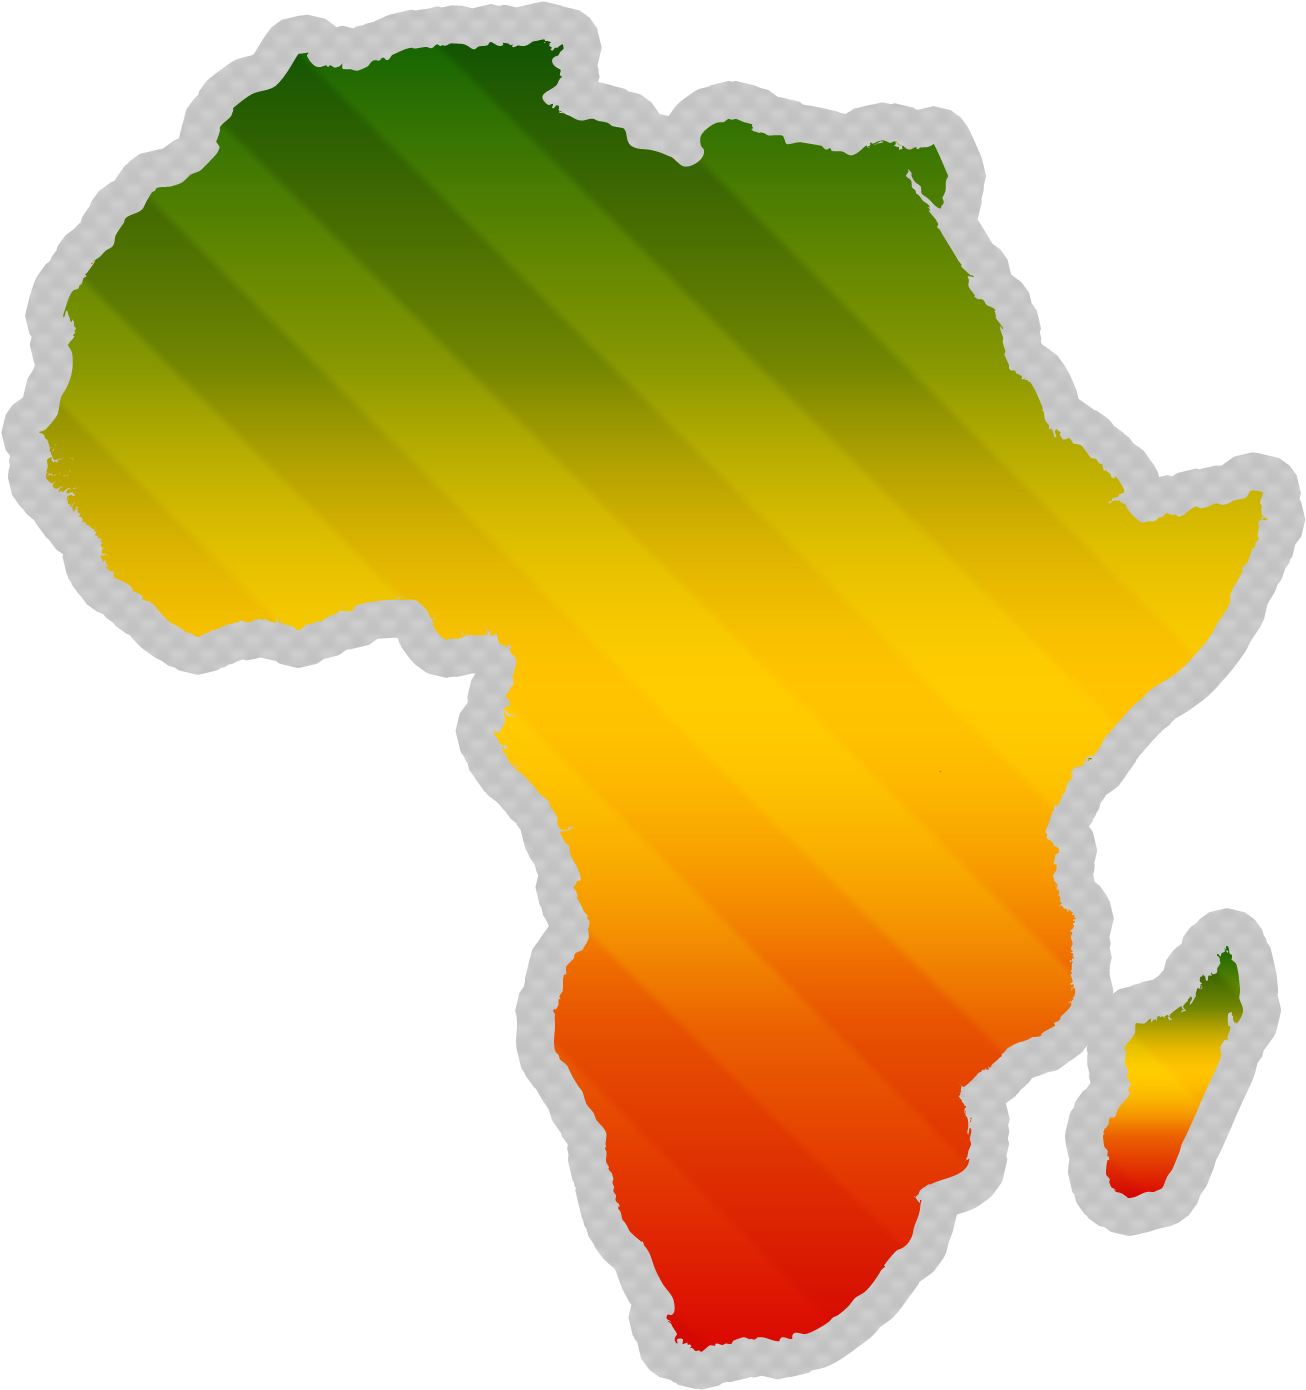 Africa Clipart Ancient - Africa Map Clipart Transparent (1360x1405)